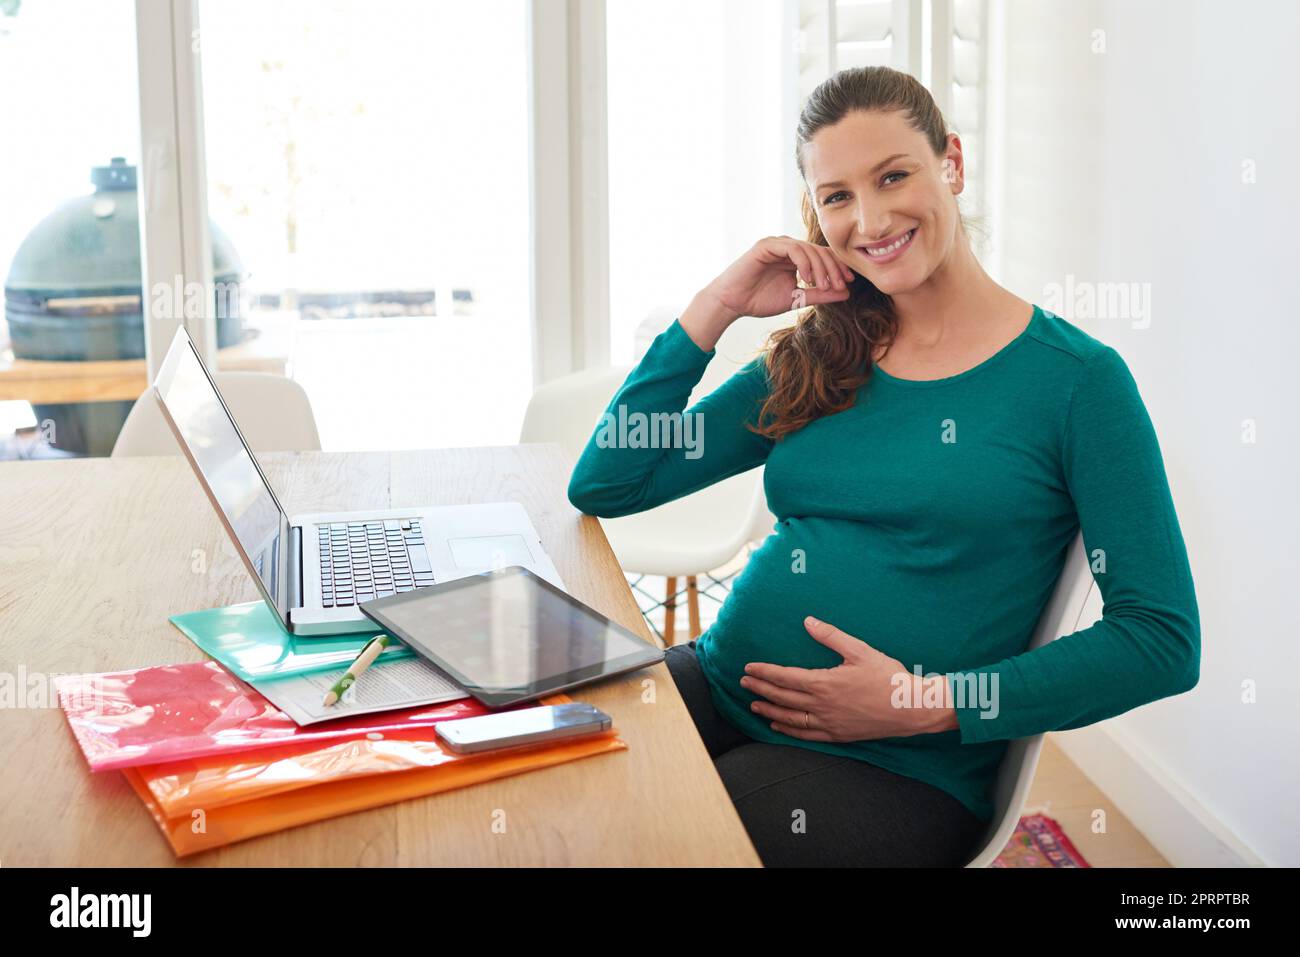 Happy Pregnant Woman Using Laptop on Chair Stock Image - Image of